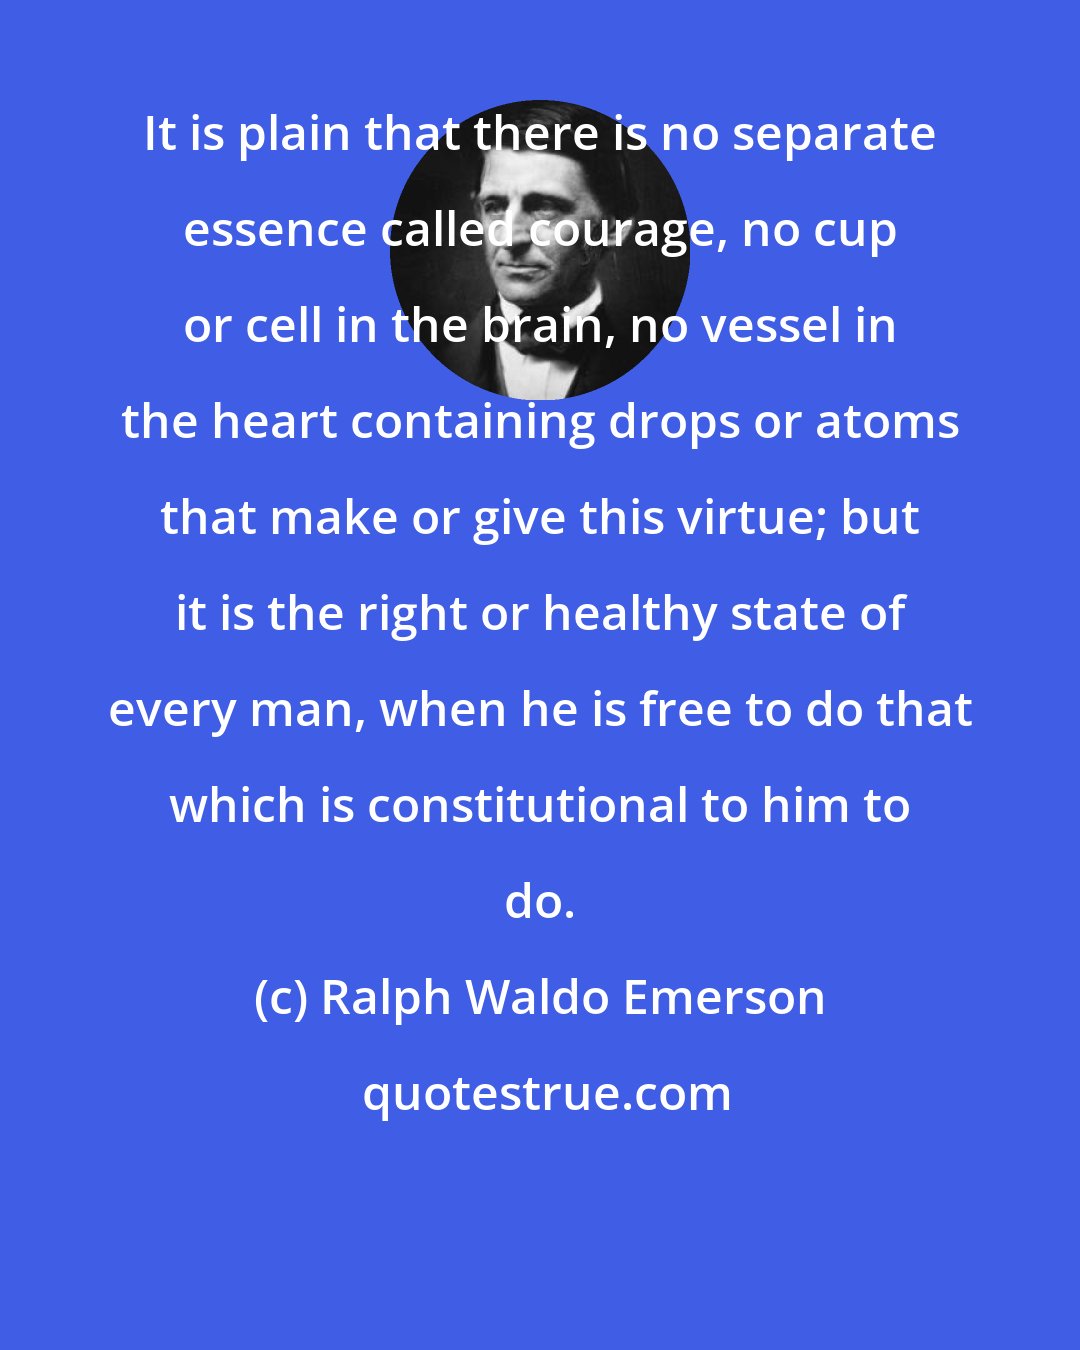 Ralph Waldo Emerson: It is plain that there is no separate essence called courage, no cup or cell in the brain, no vessel in the heart containing drops or atoms that make or give this virtue; but it is the right or healthy state of every man, when he is free to do that which is constitutional to him to do.